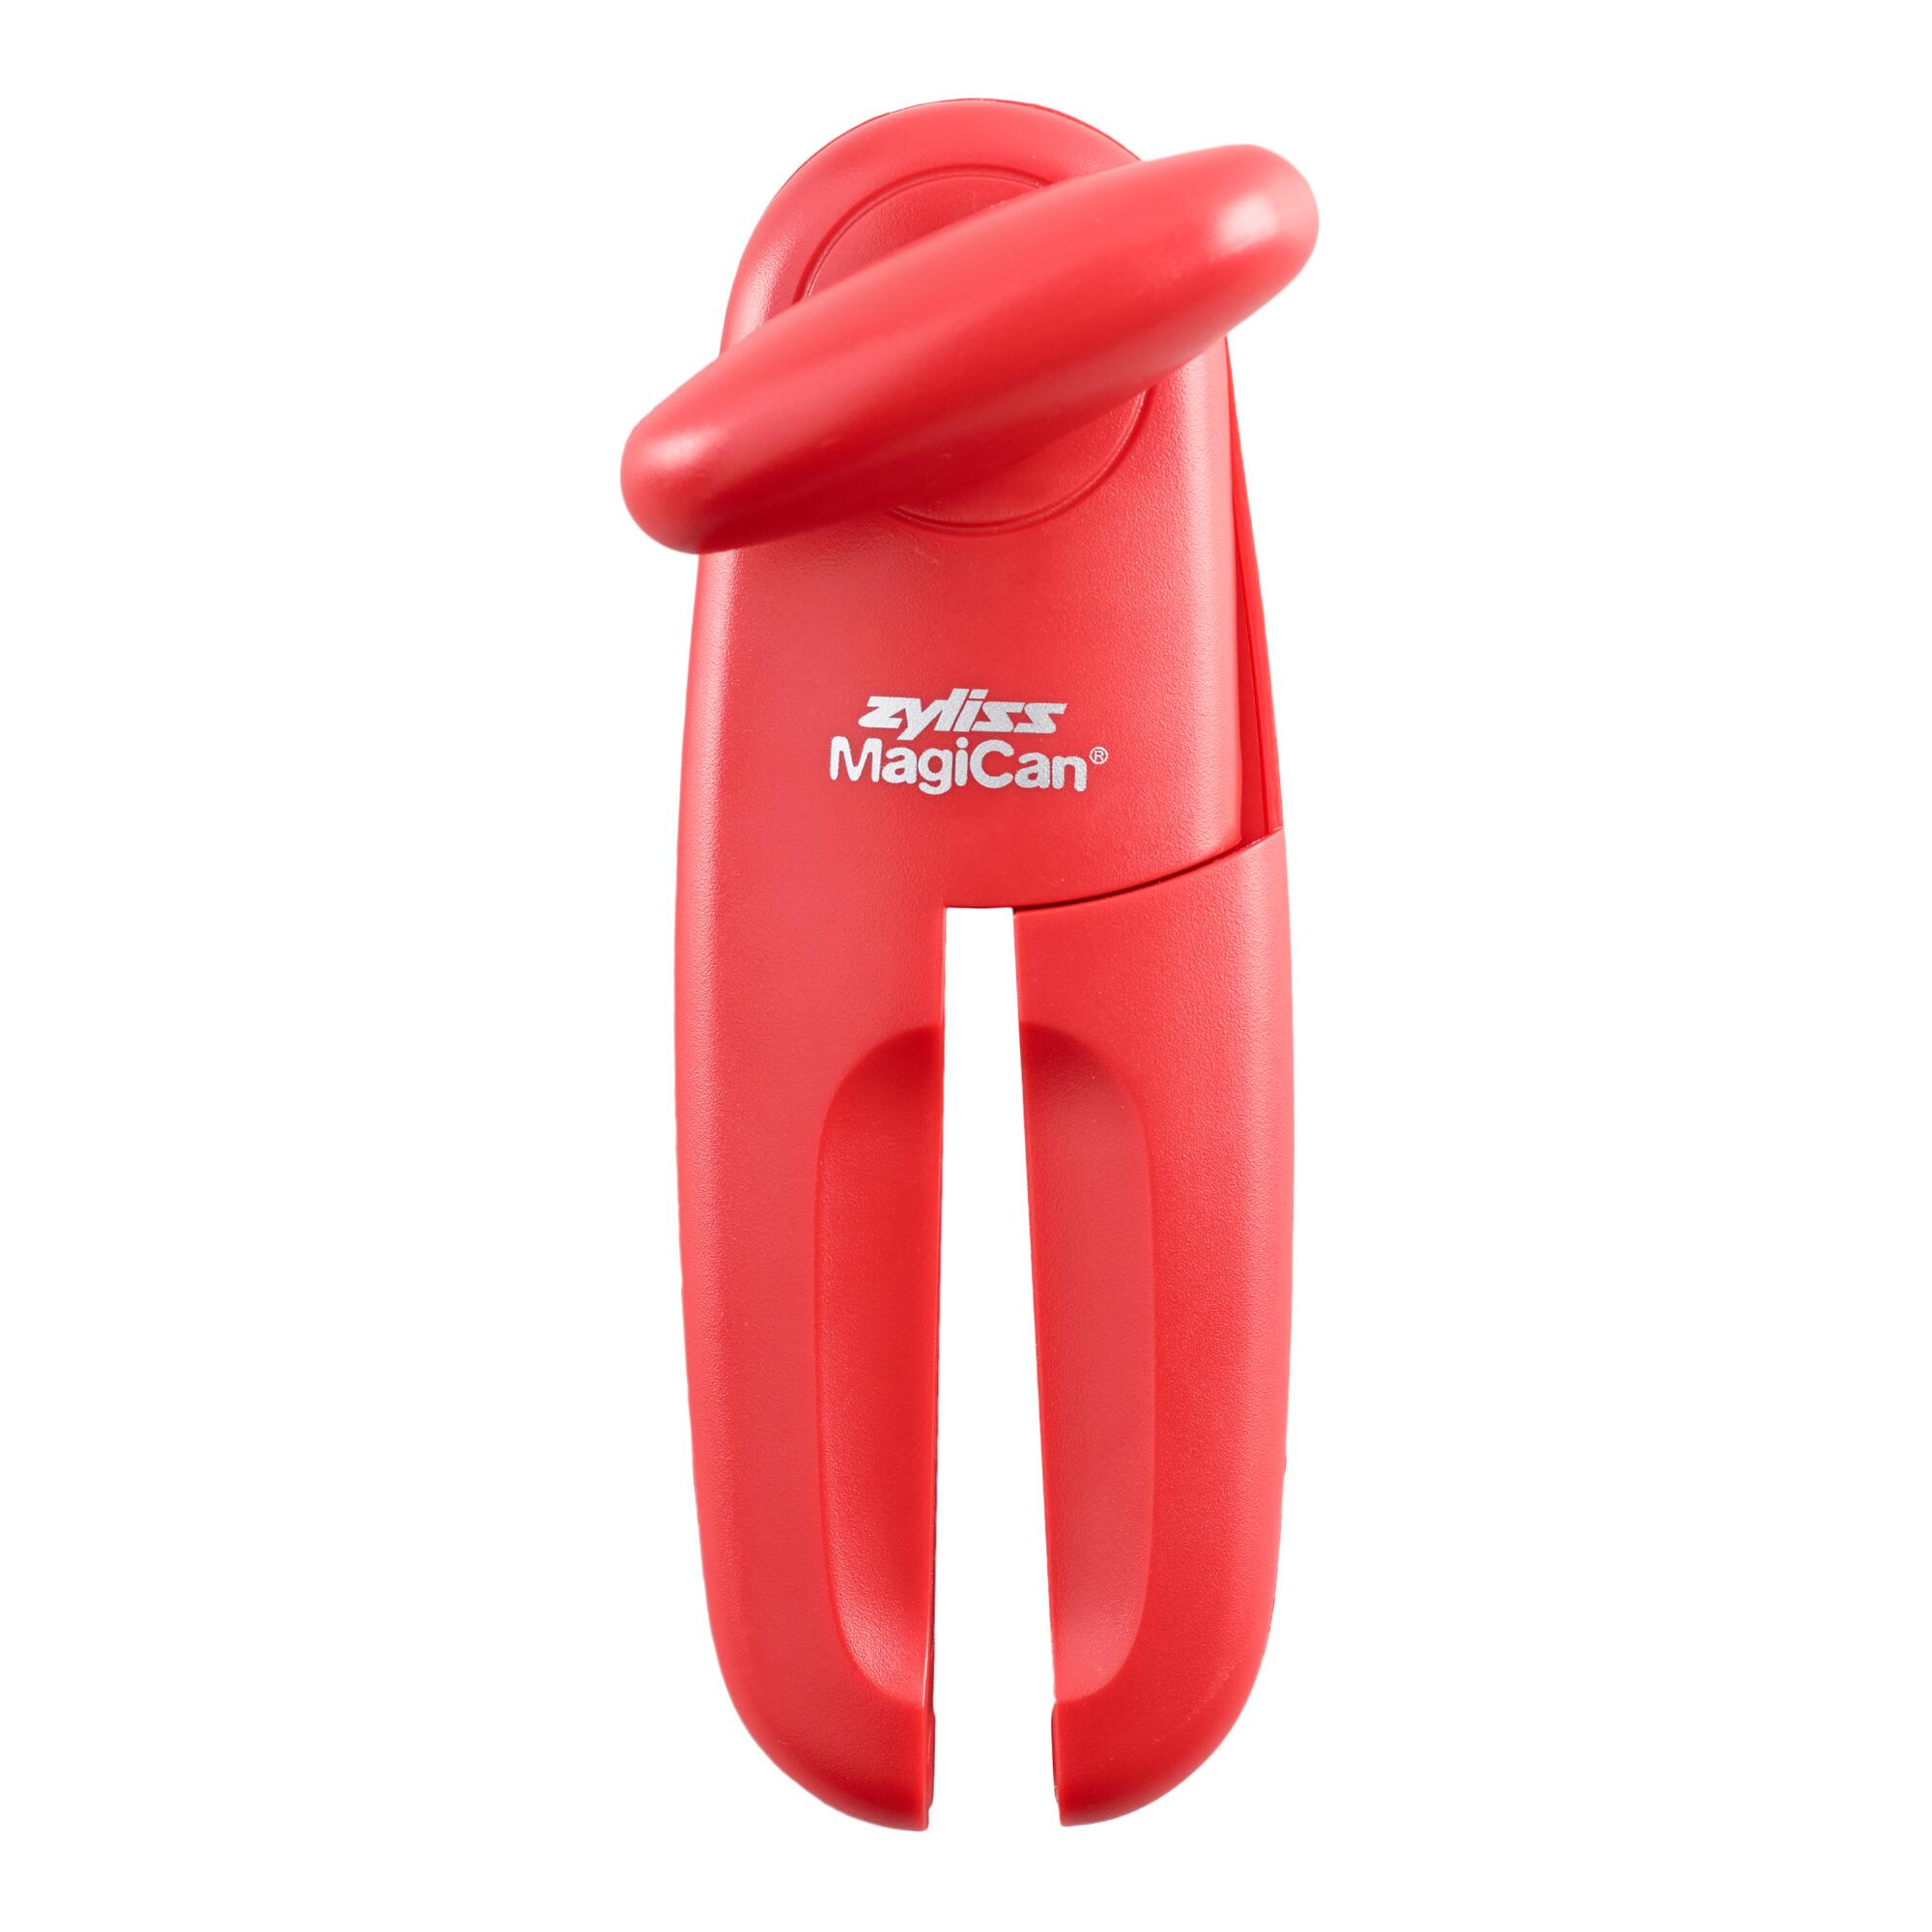 Zyliss MagiCan Can Opener by World Market